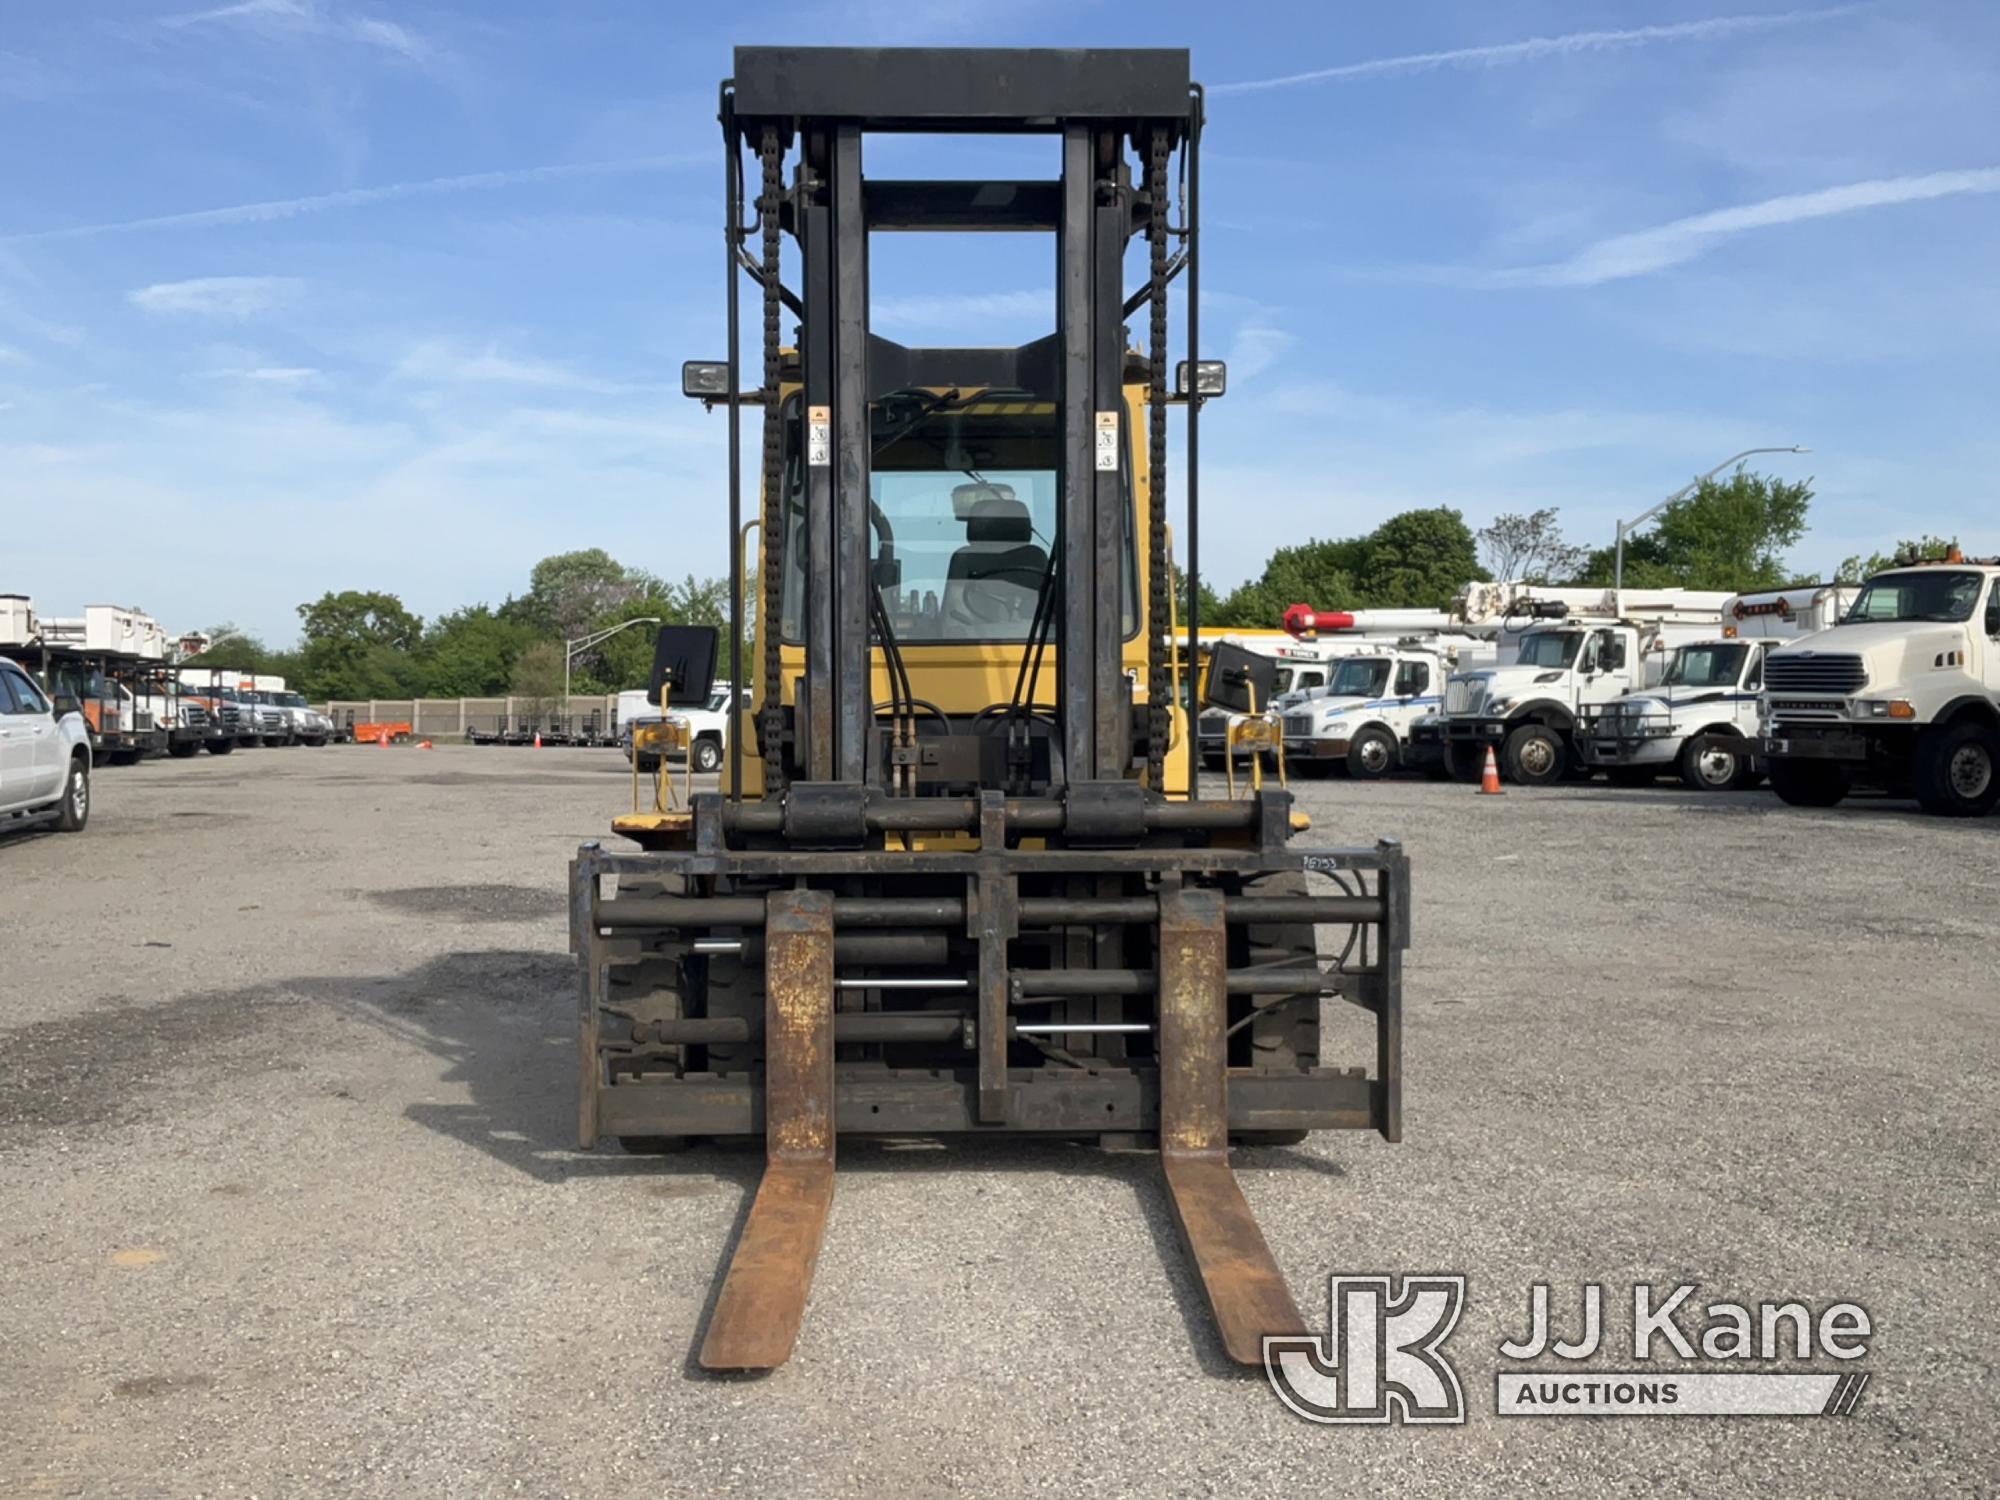 (Plymouth Meeting, PA) 2004 Daewoo D120 Solid Tired Forklift Runs Moves & Operates, Bad Fuel Shut Of